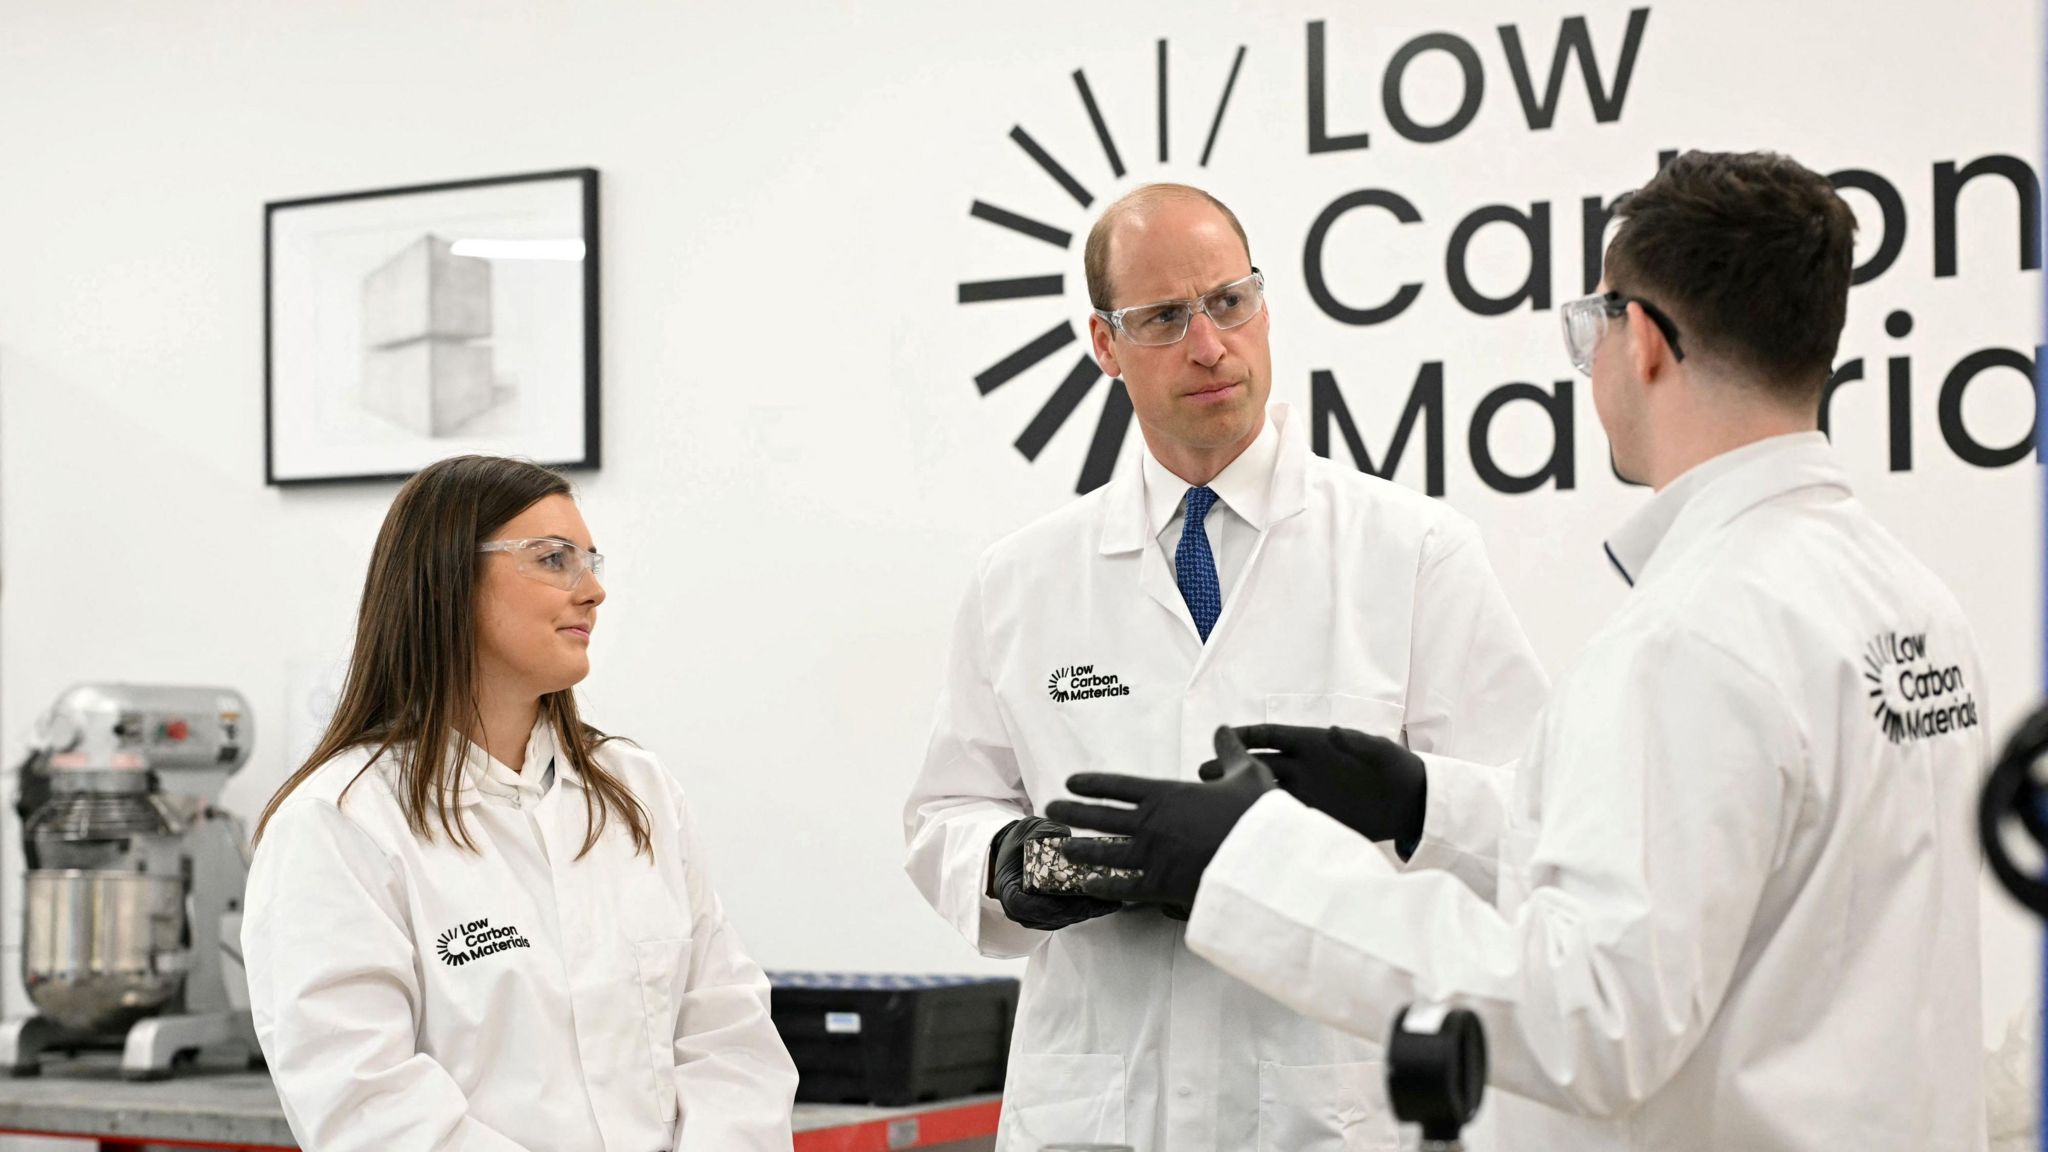 Prince William with two members of staff wearing lab coats